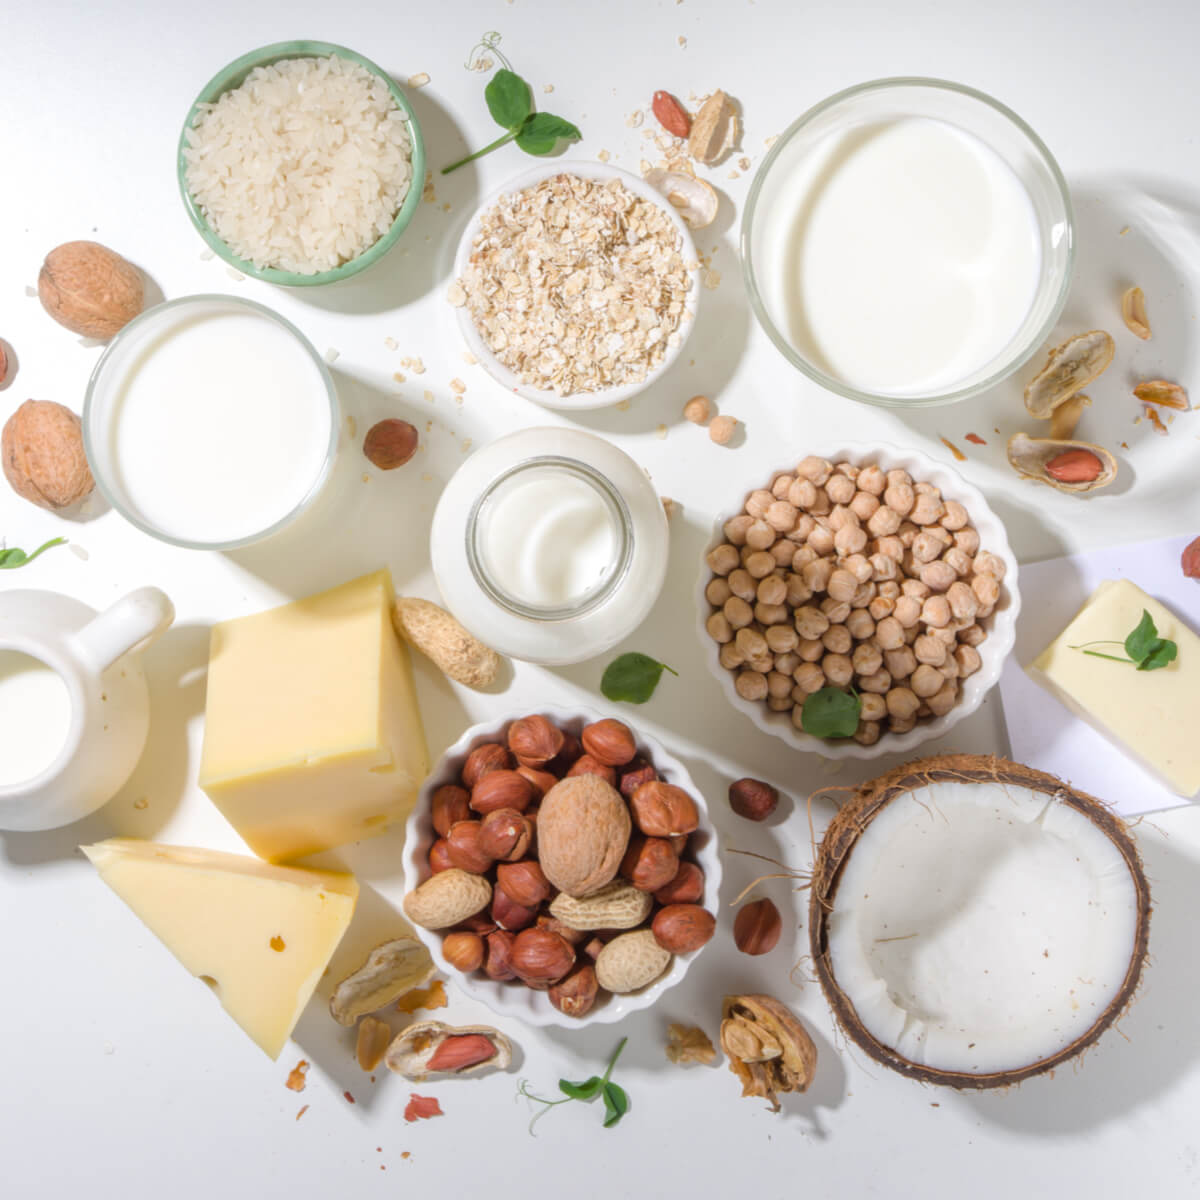 vegan dairy alternatives (savoury) - milk, cheese, butter - made from plants